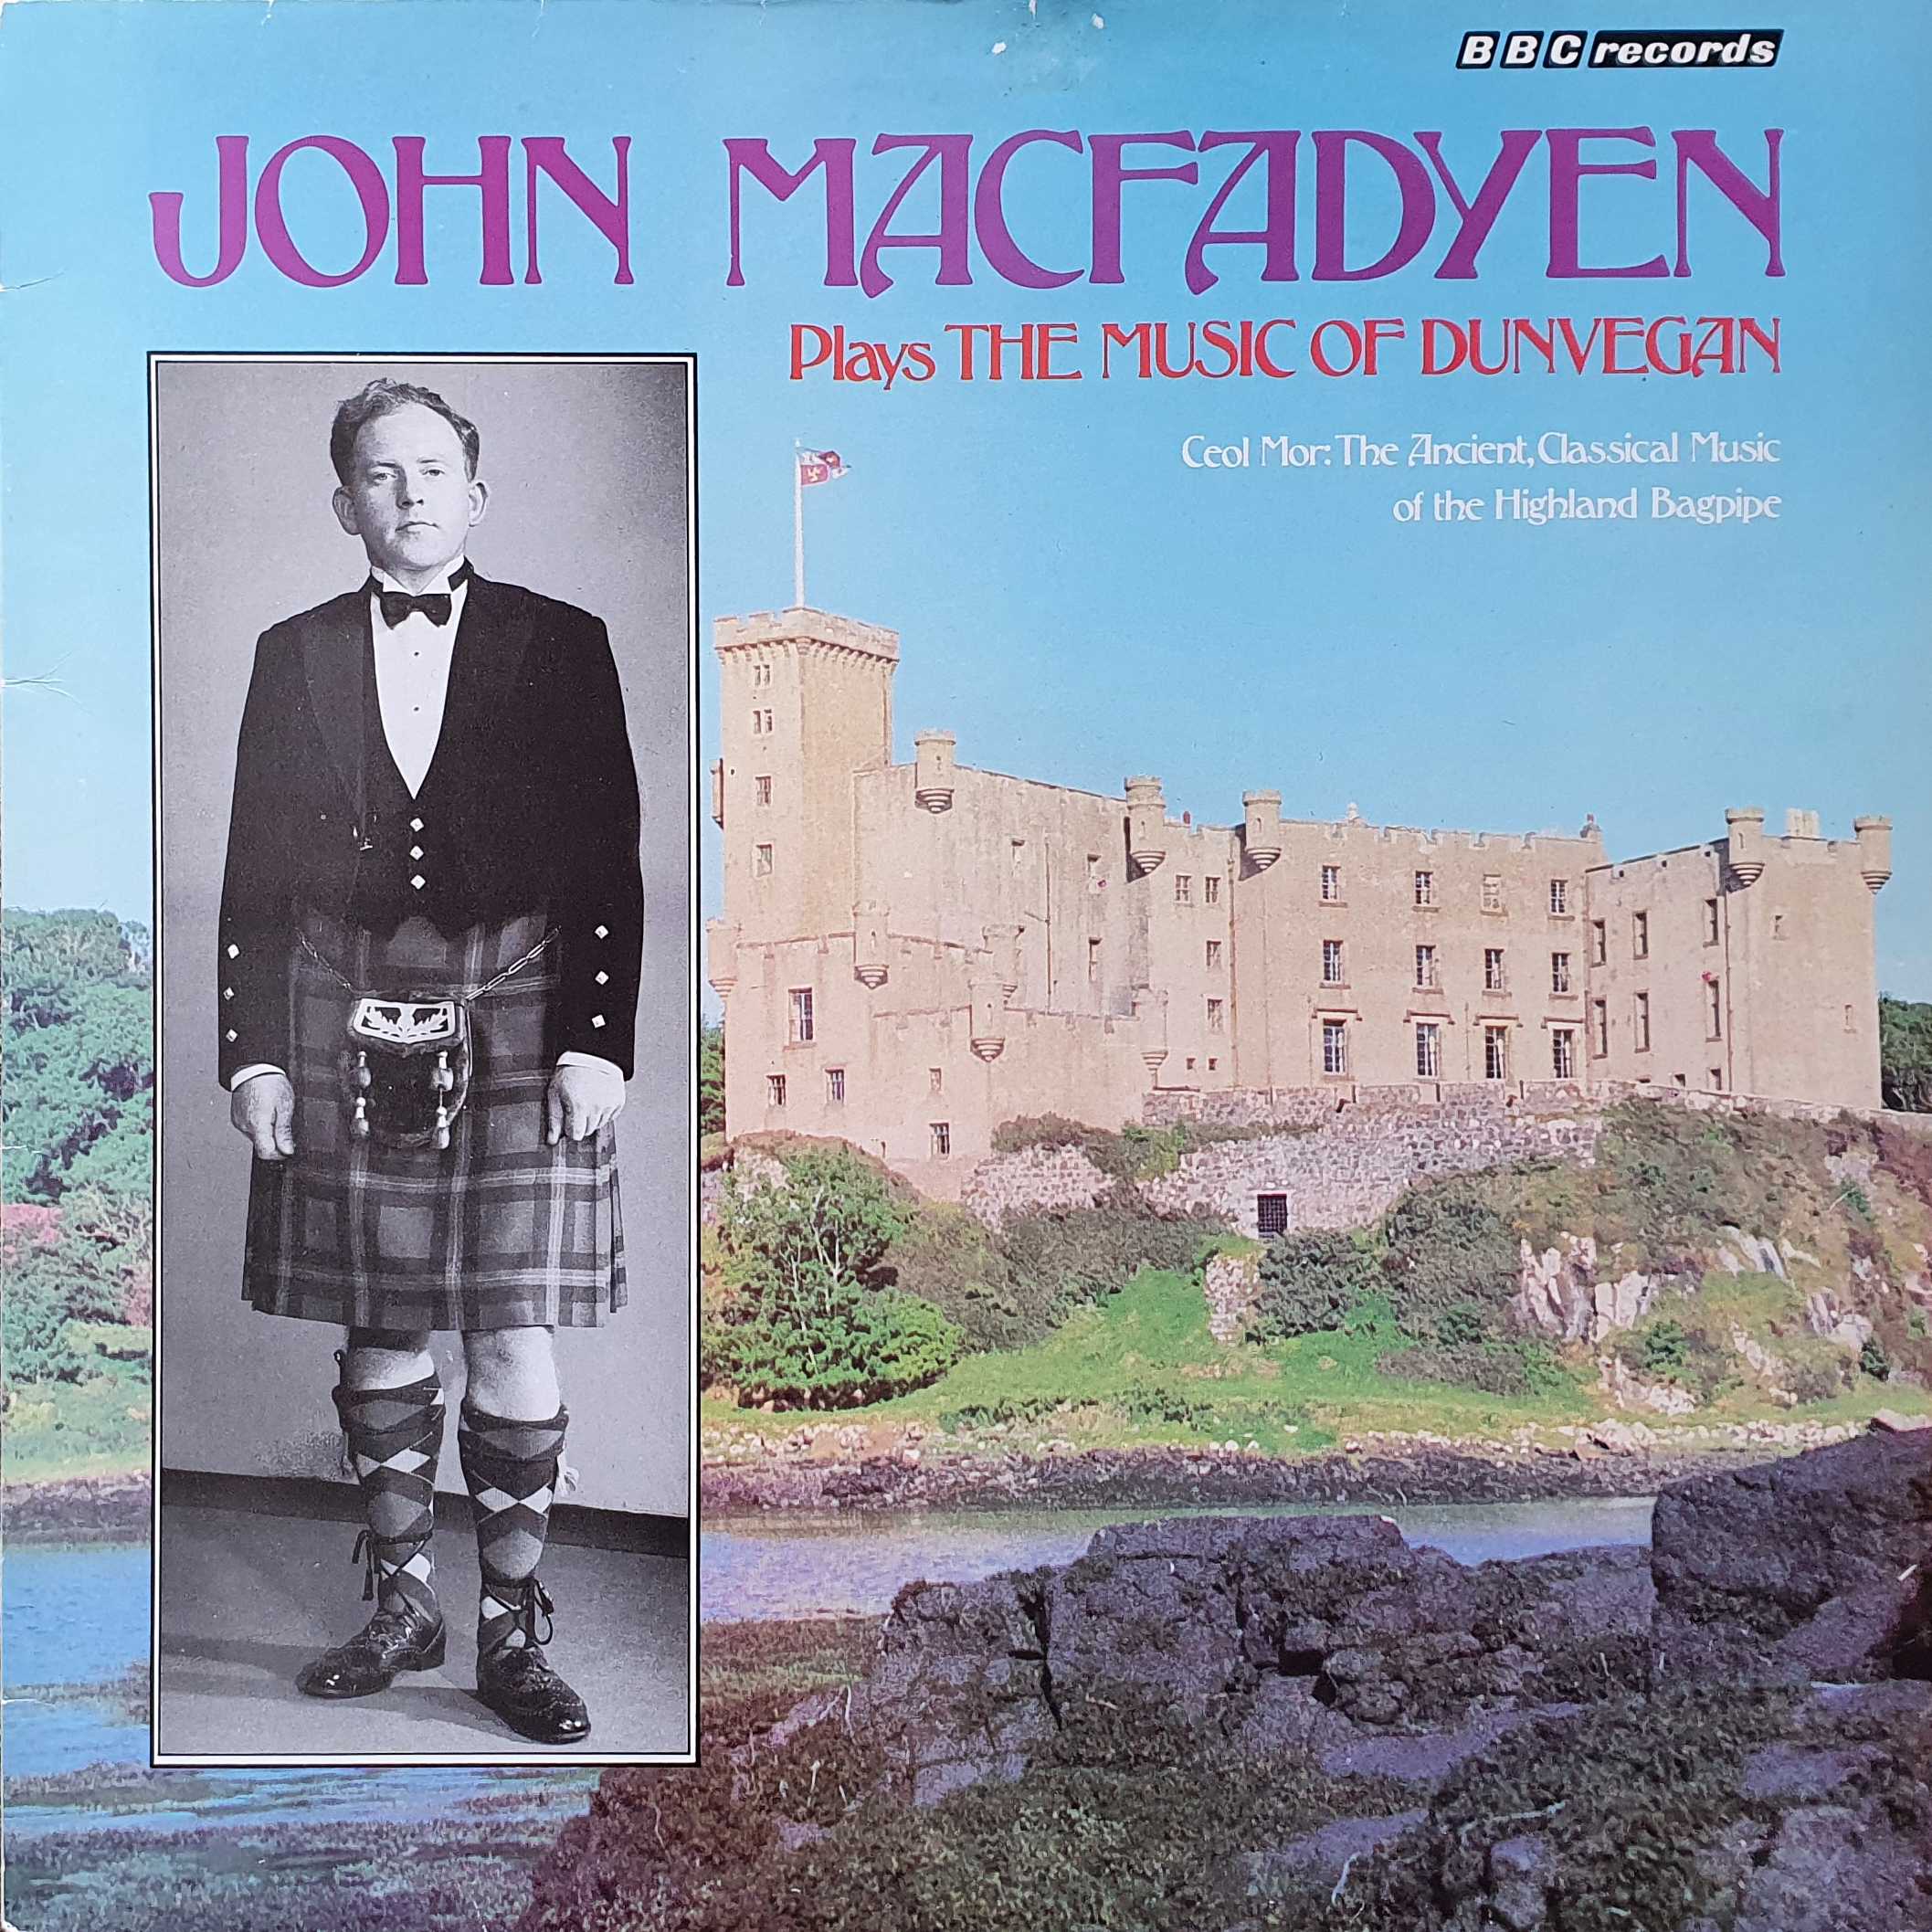 Picture of REC 403 John MacFadyen: Plays the Music of Dunvegan by artist John MacFadyen from the BBC albums - Records and Tapes library